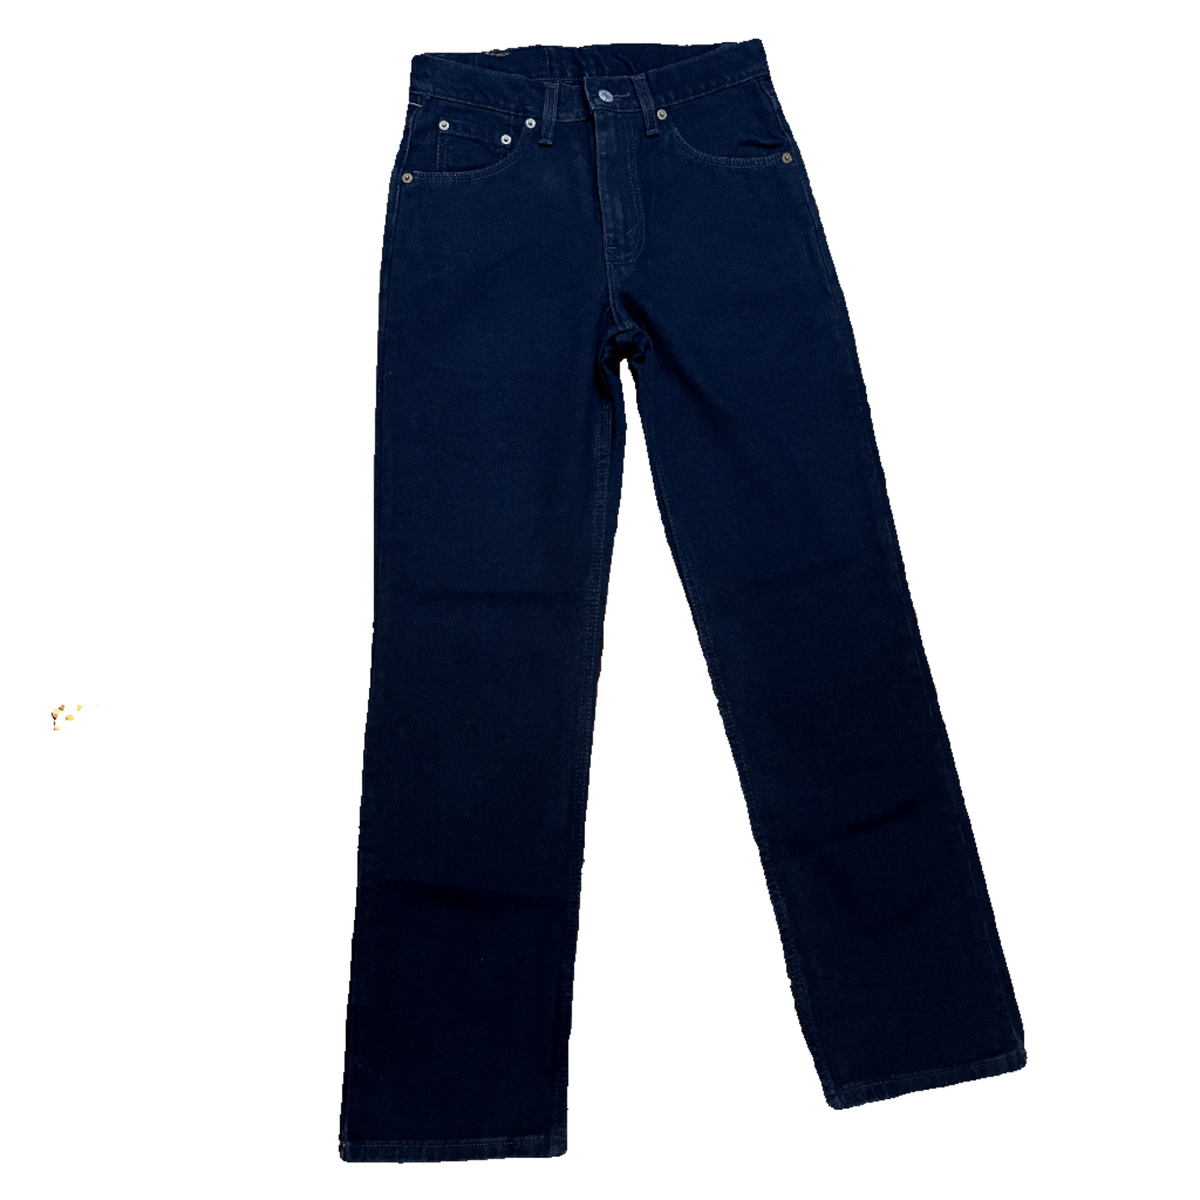 What jeans should we wear after the pandemic? Flared, skinny